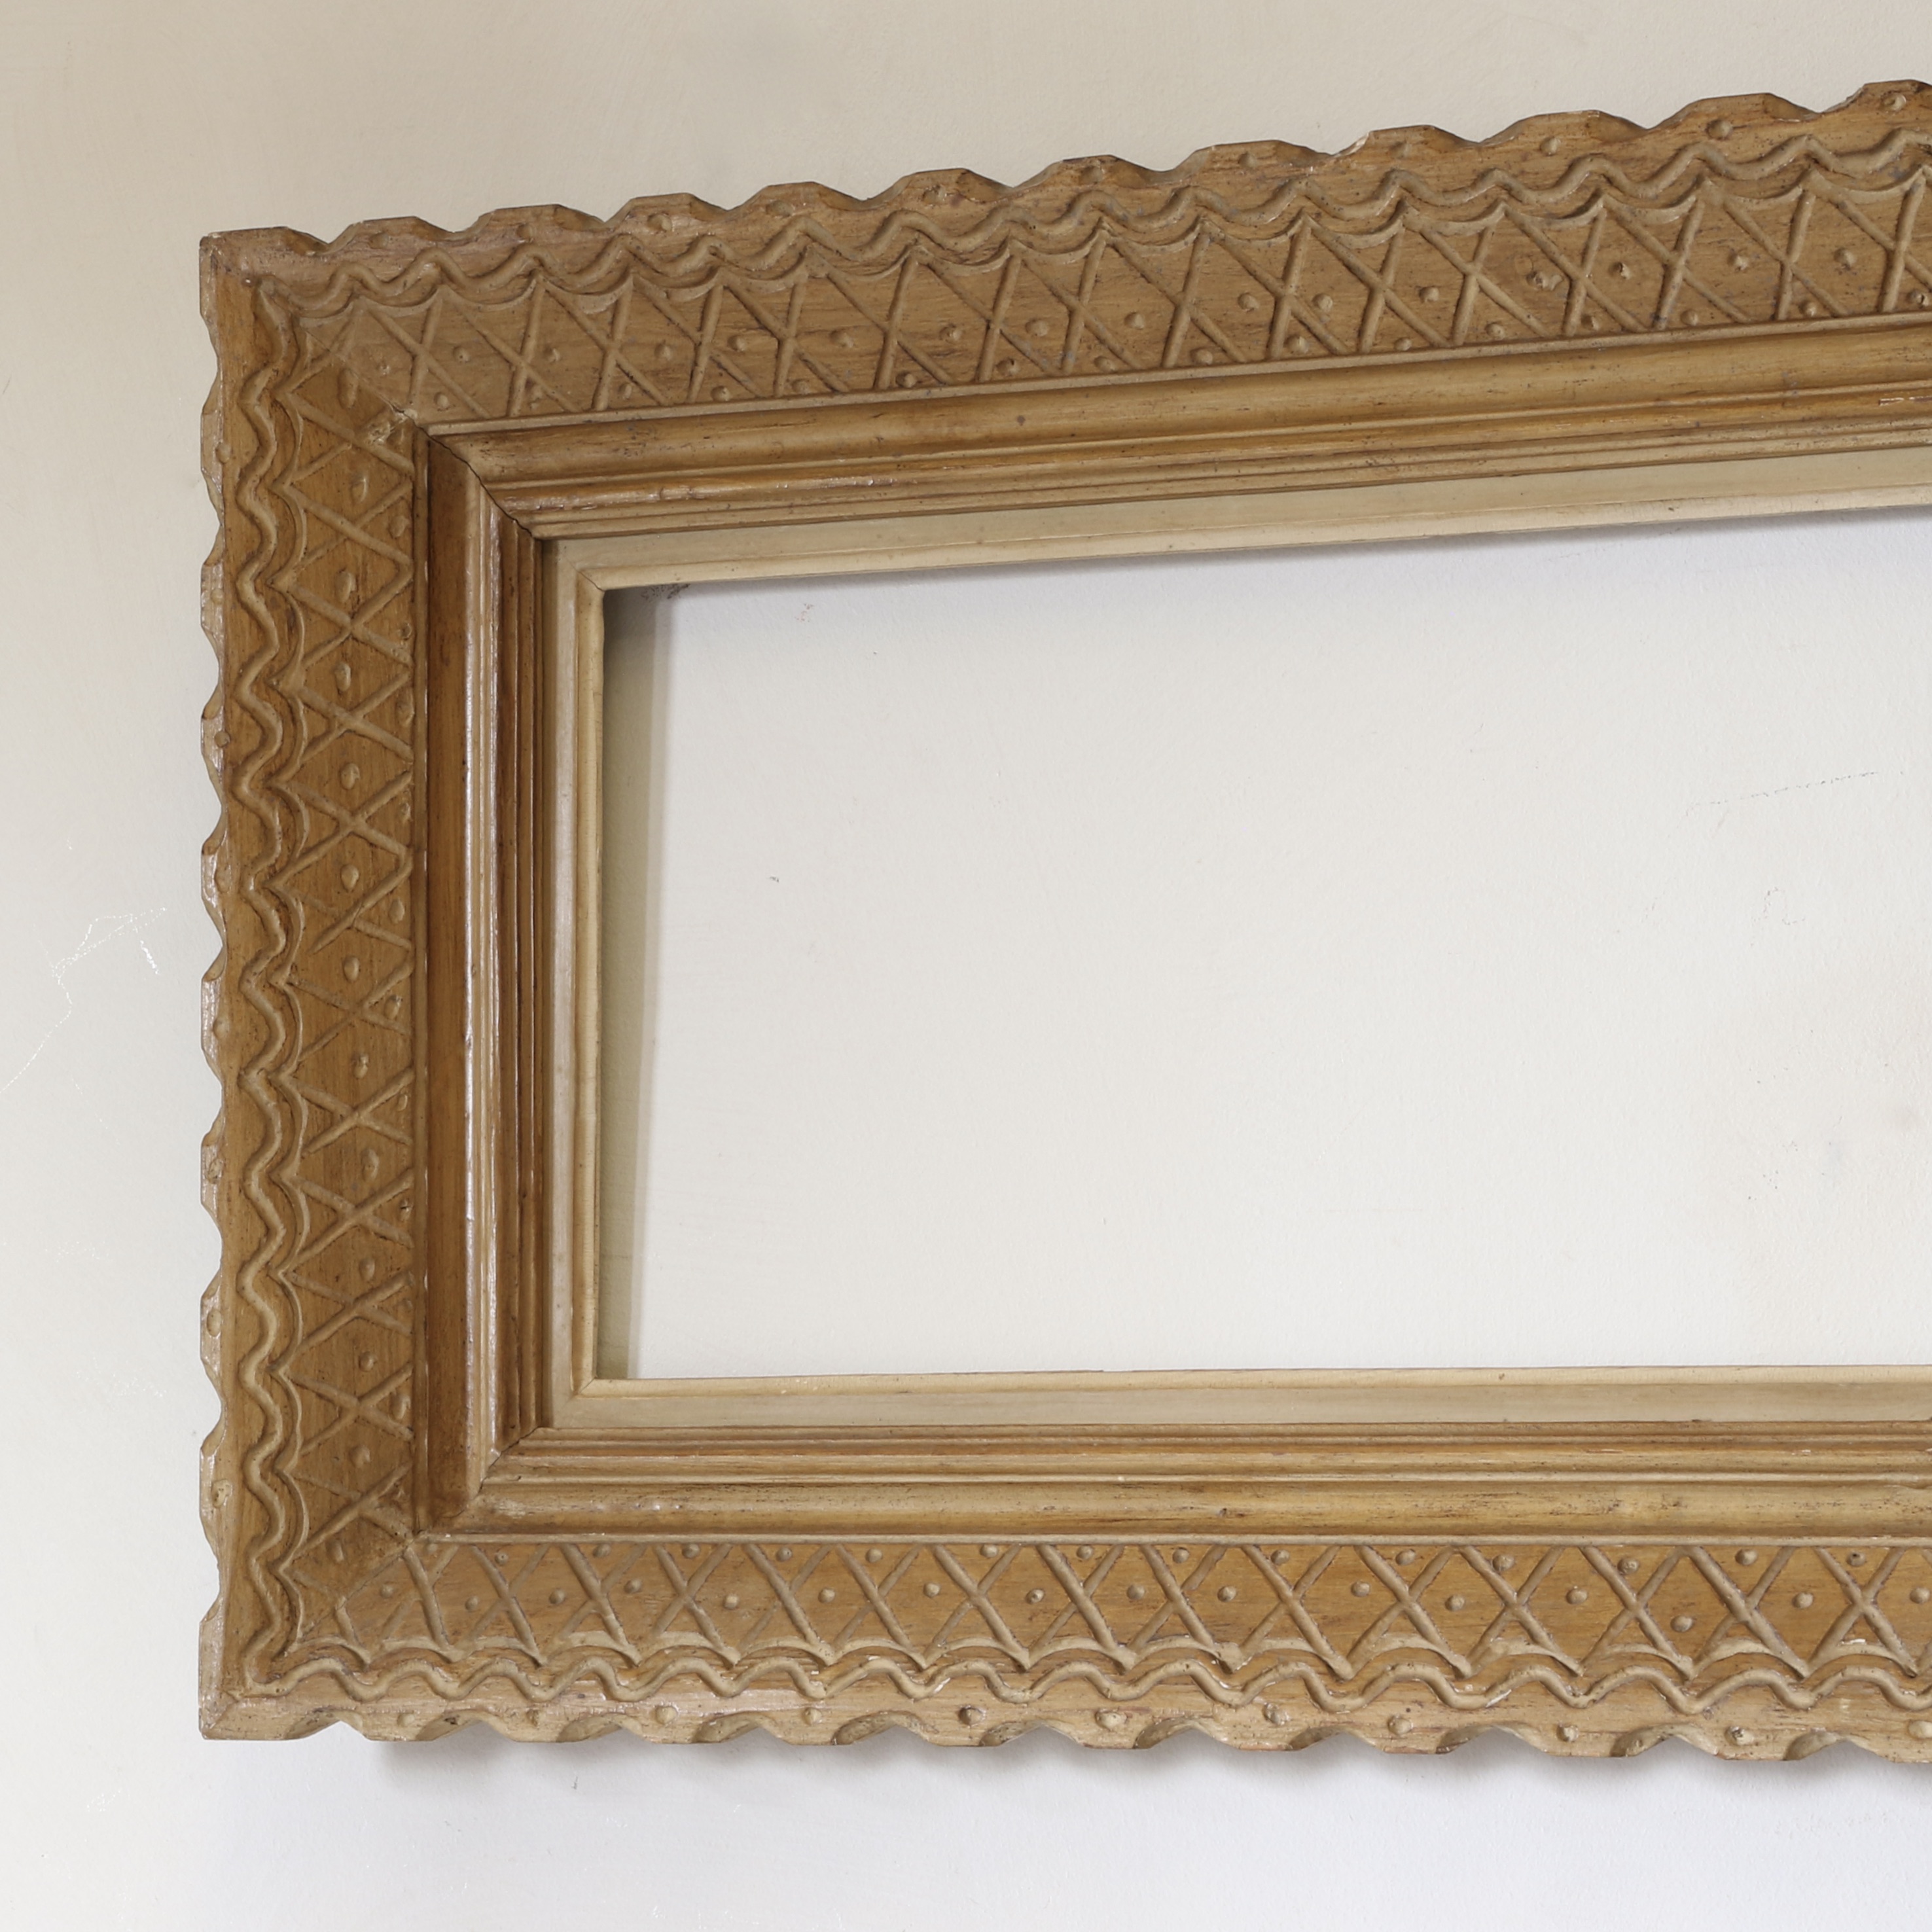 145-29 - E. Bouche Carved Picture Frame